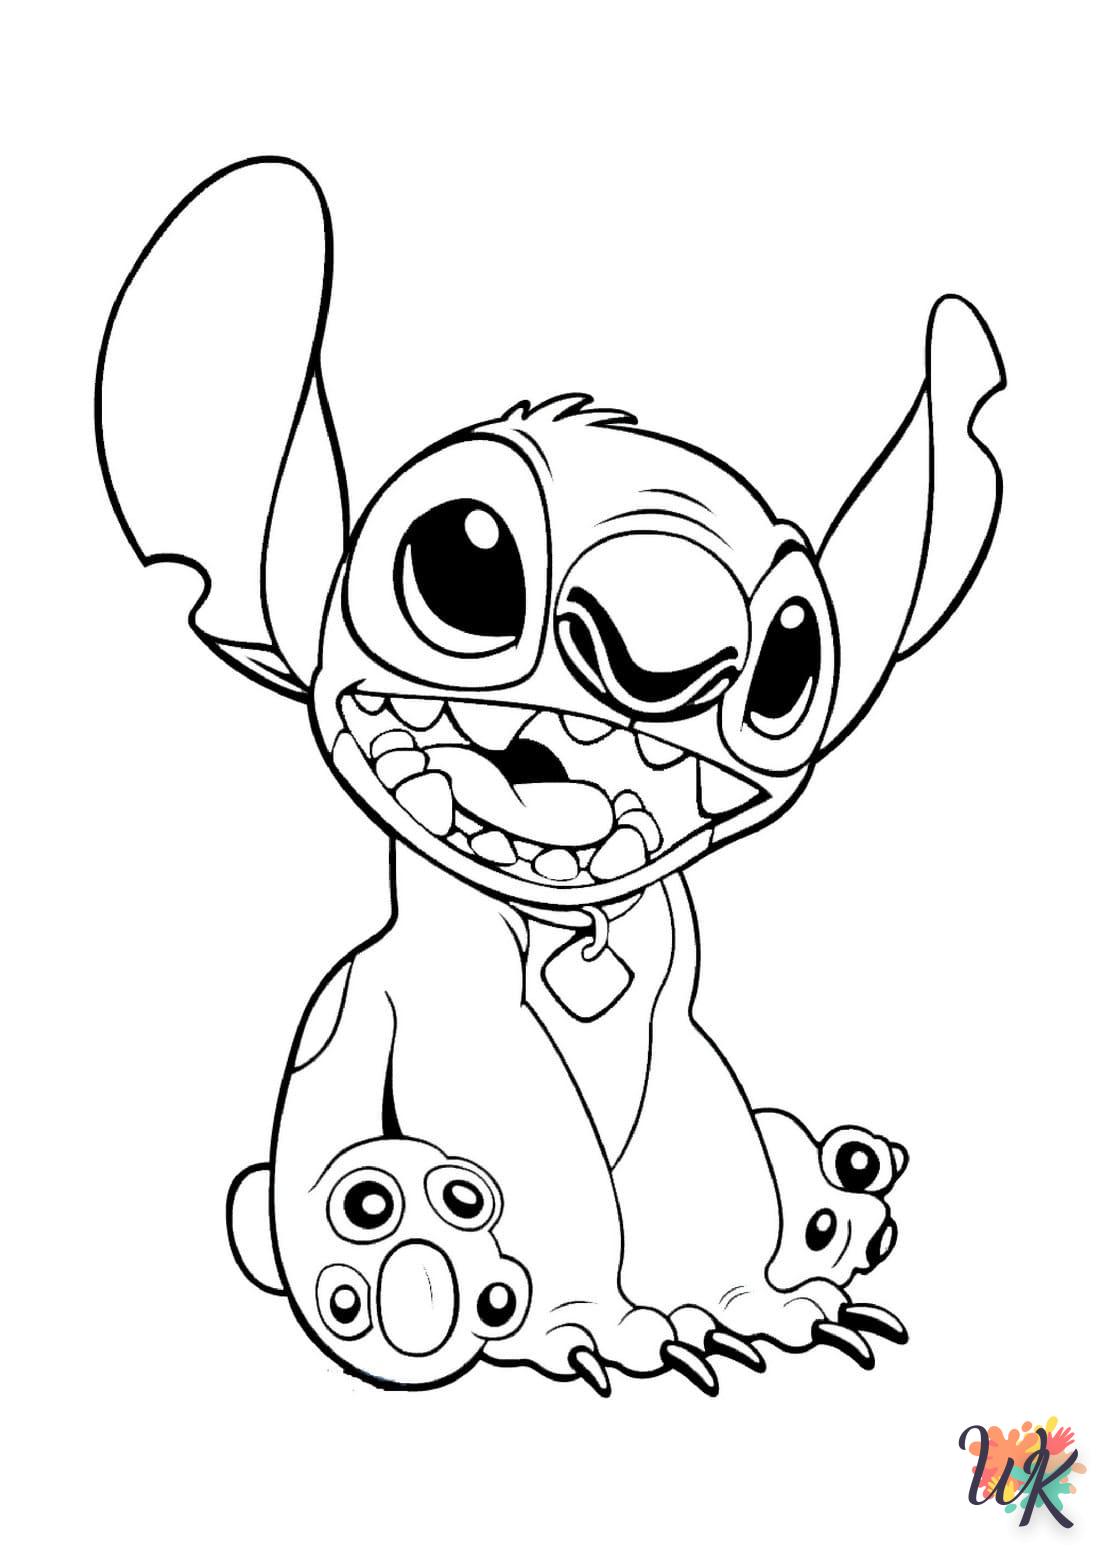 Disney coloring page for children aged 7 to print 3